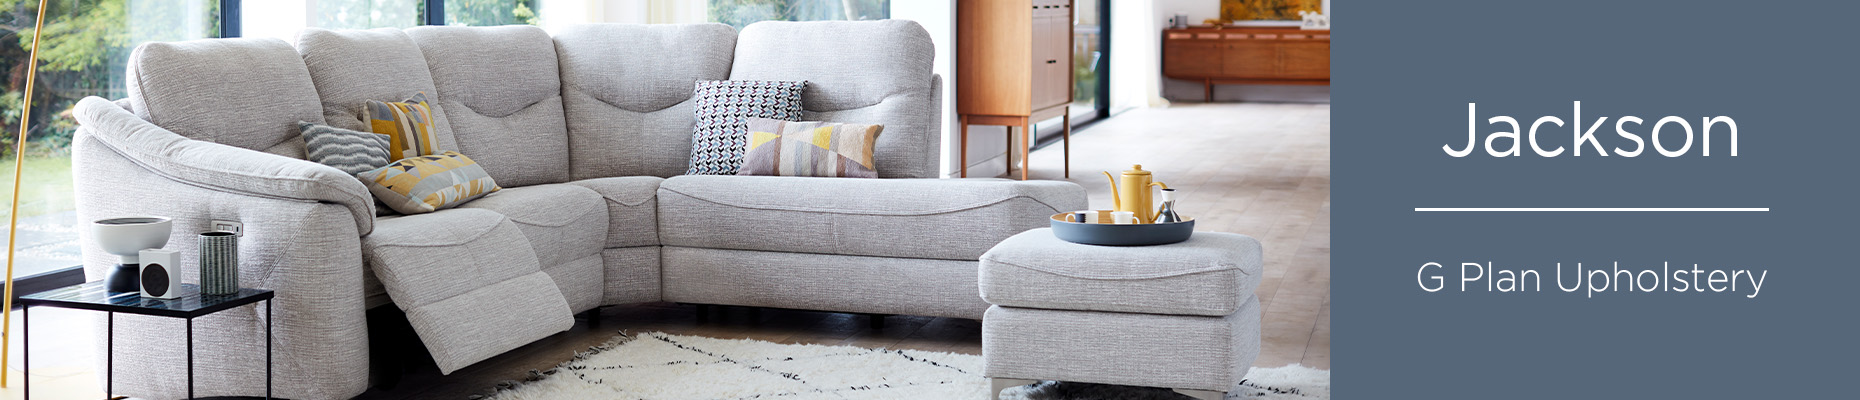 Jackson sofa collection at Forrest Furnishing by G Plan